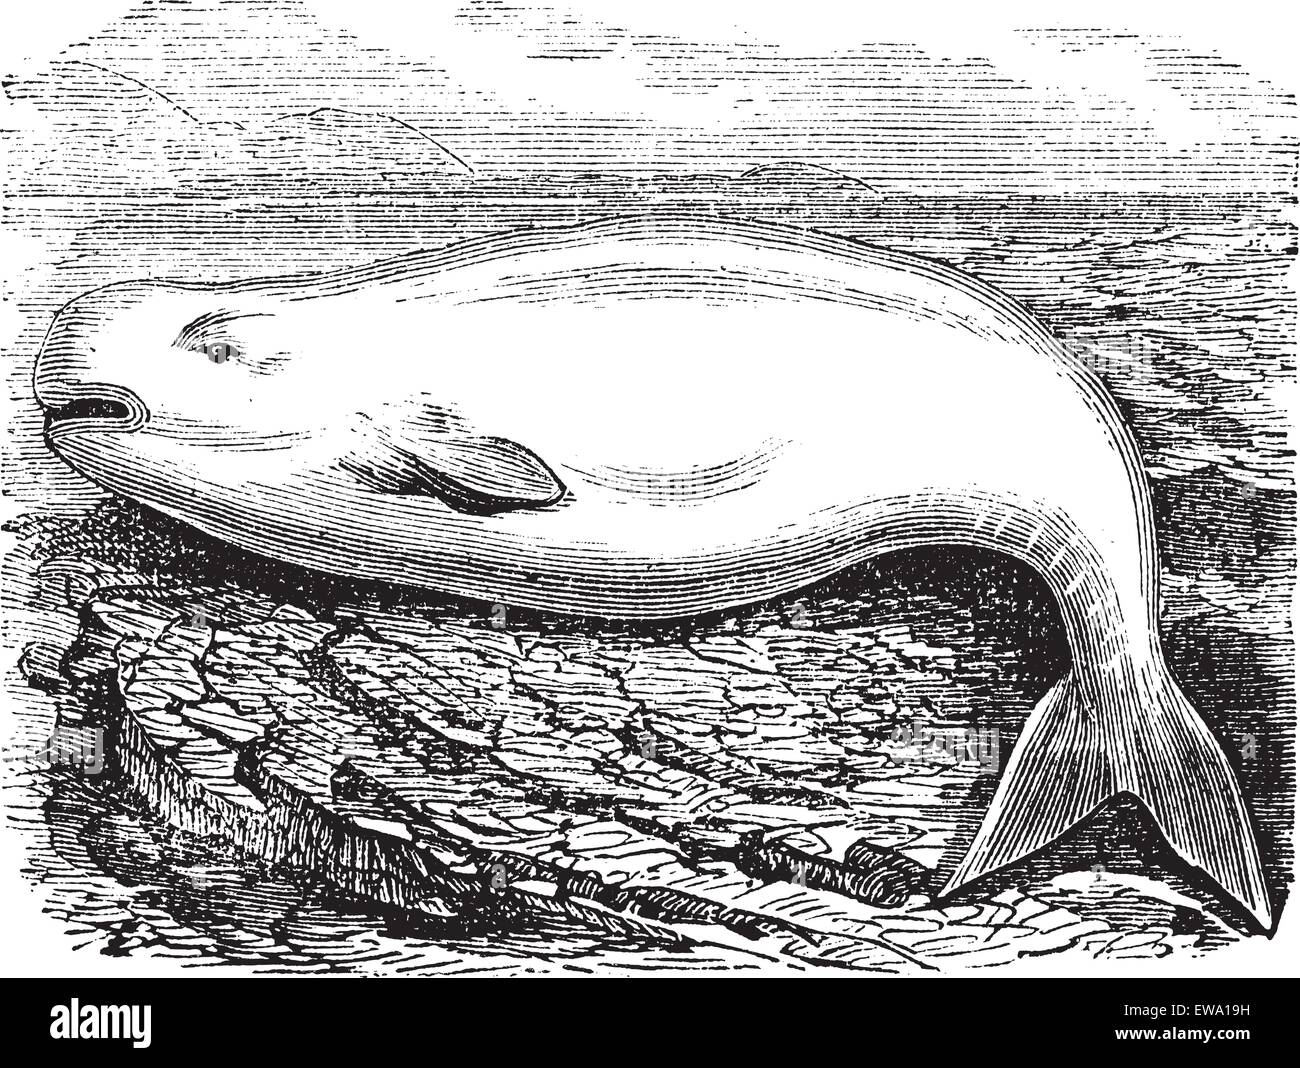 Beluga Whale or White Whale or Delphinapterus leucas, vintage engraving. Old engraved illustration of a Beluga. Stock Vector